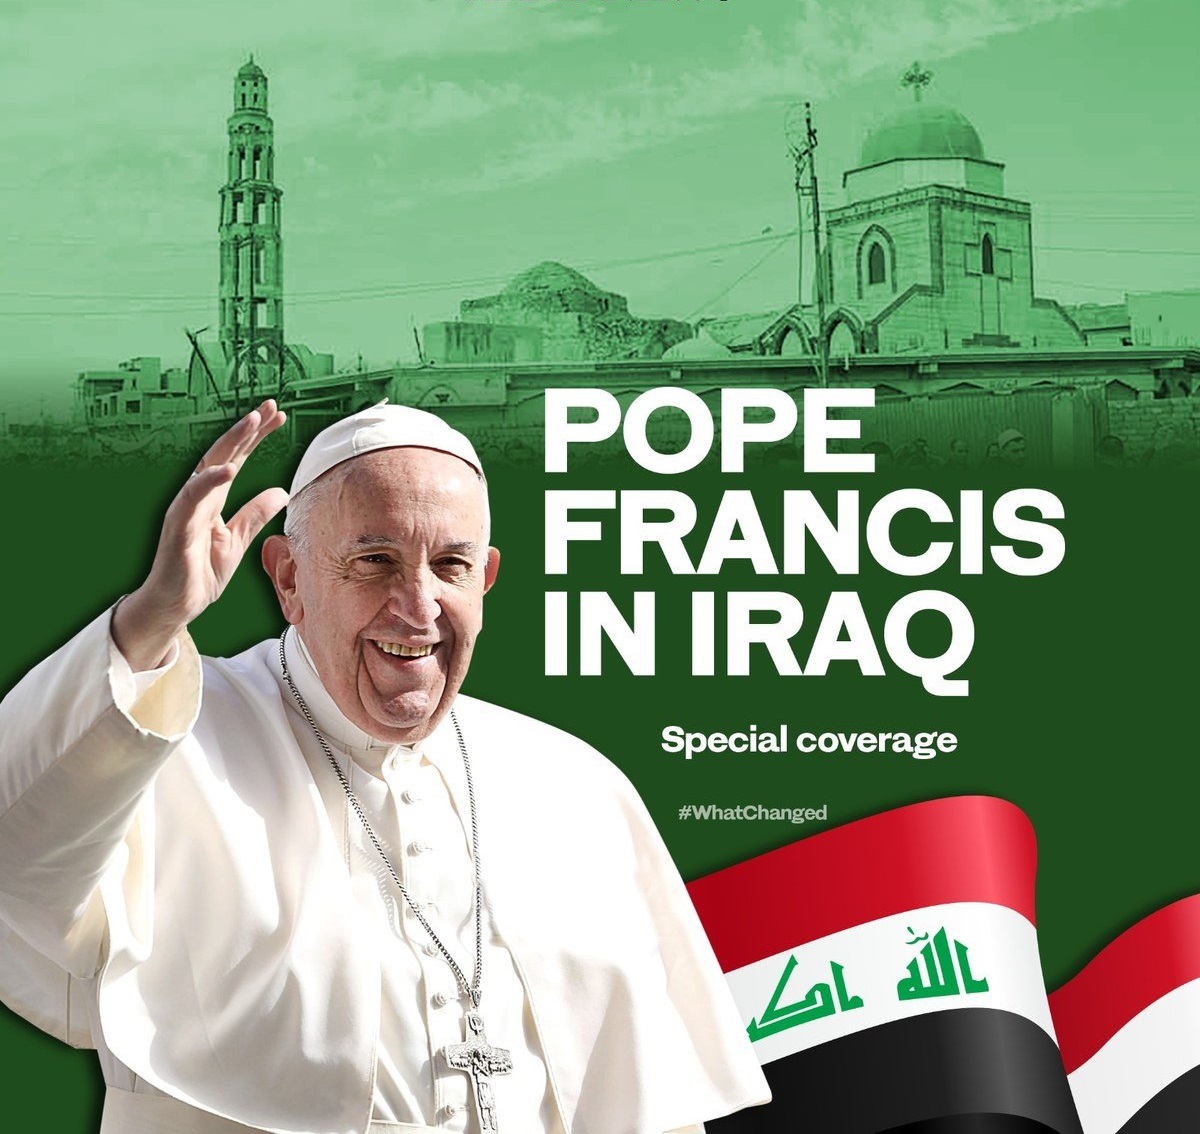 Pope Francis meets powerful Shia cleric in Iraq